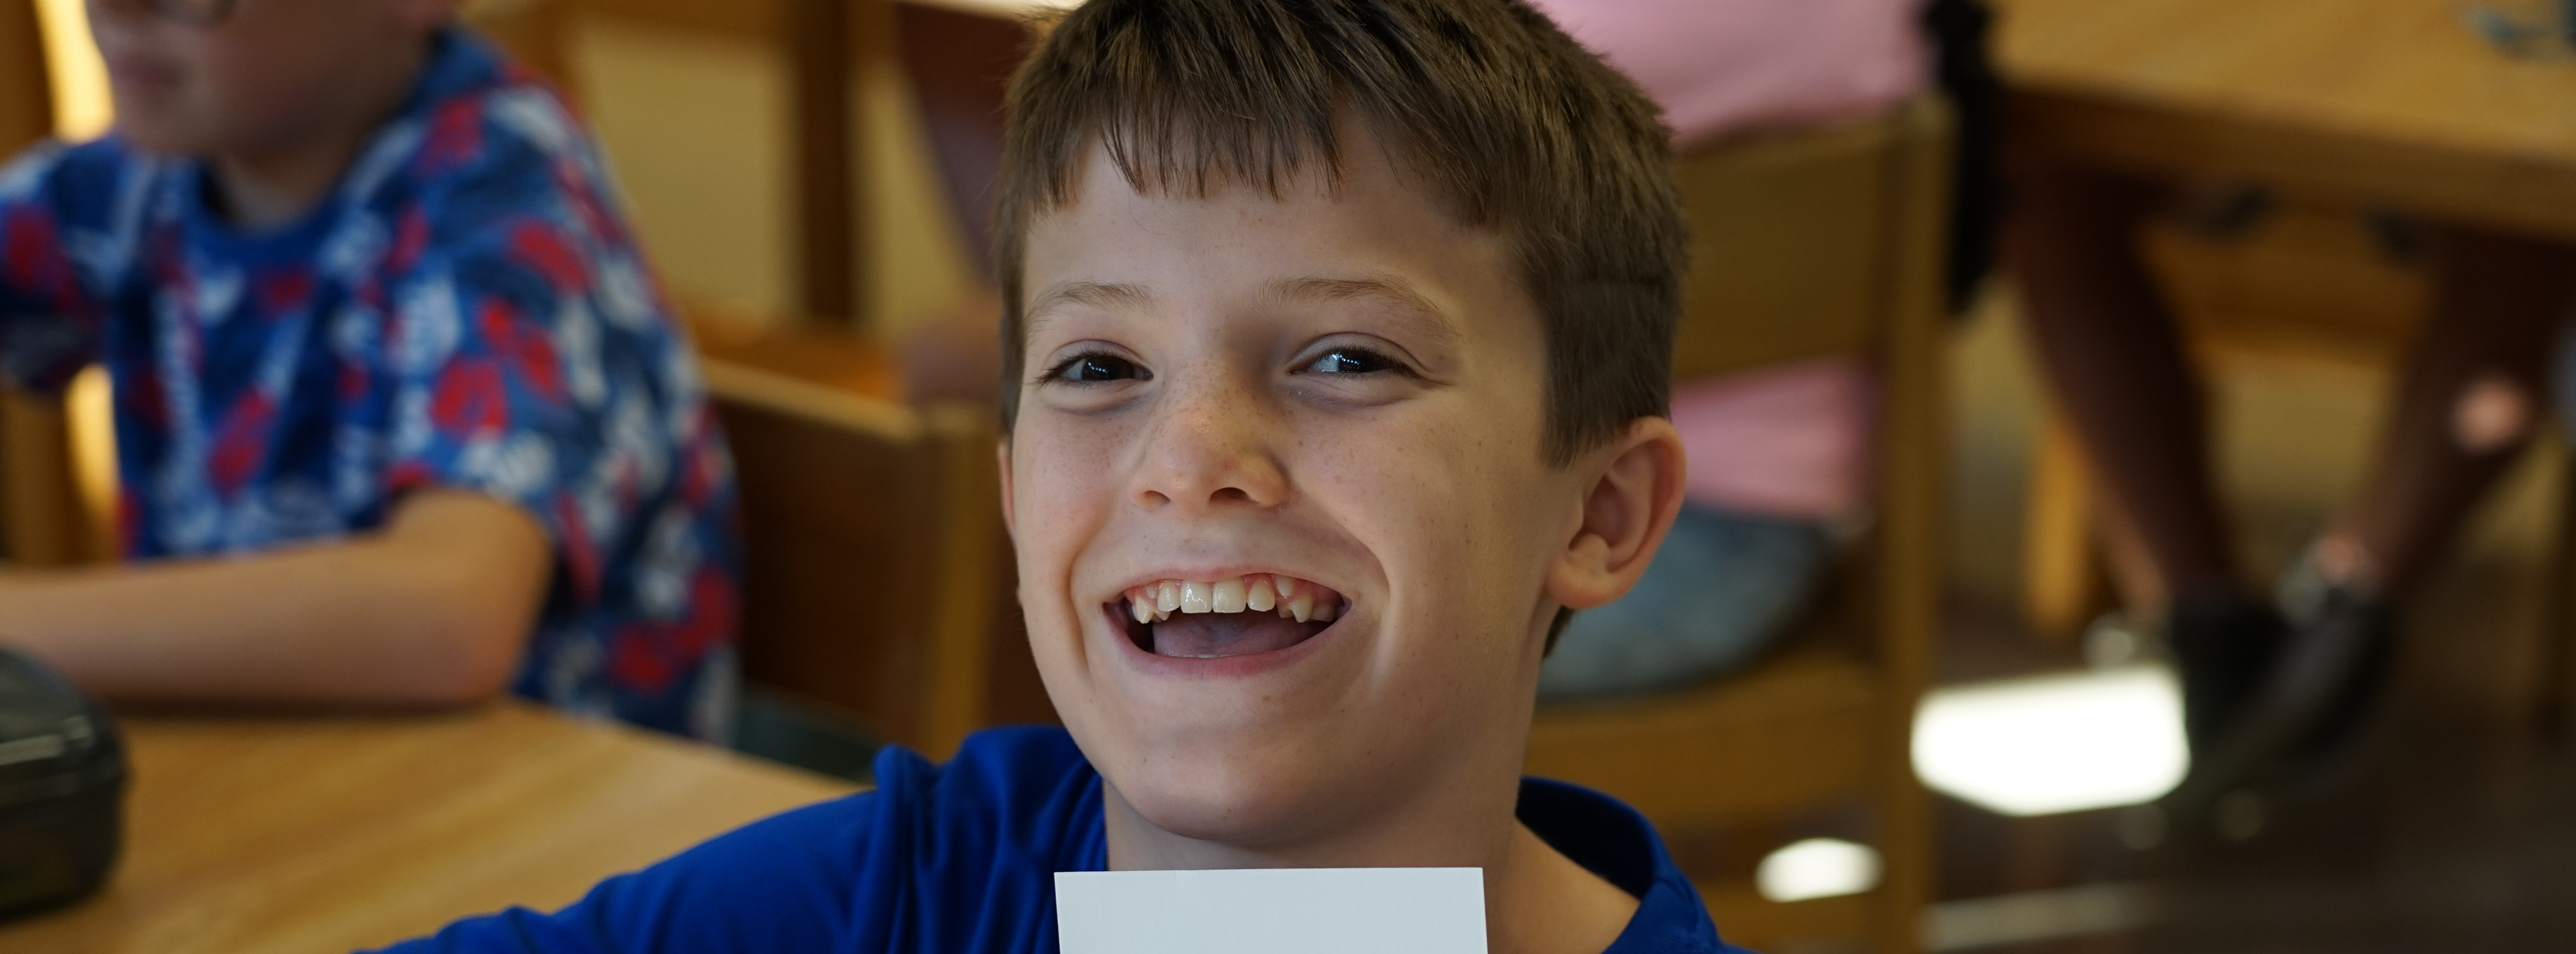 Boy in library posing and smiling at camera